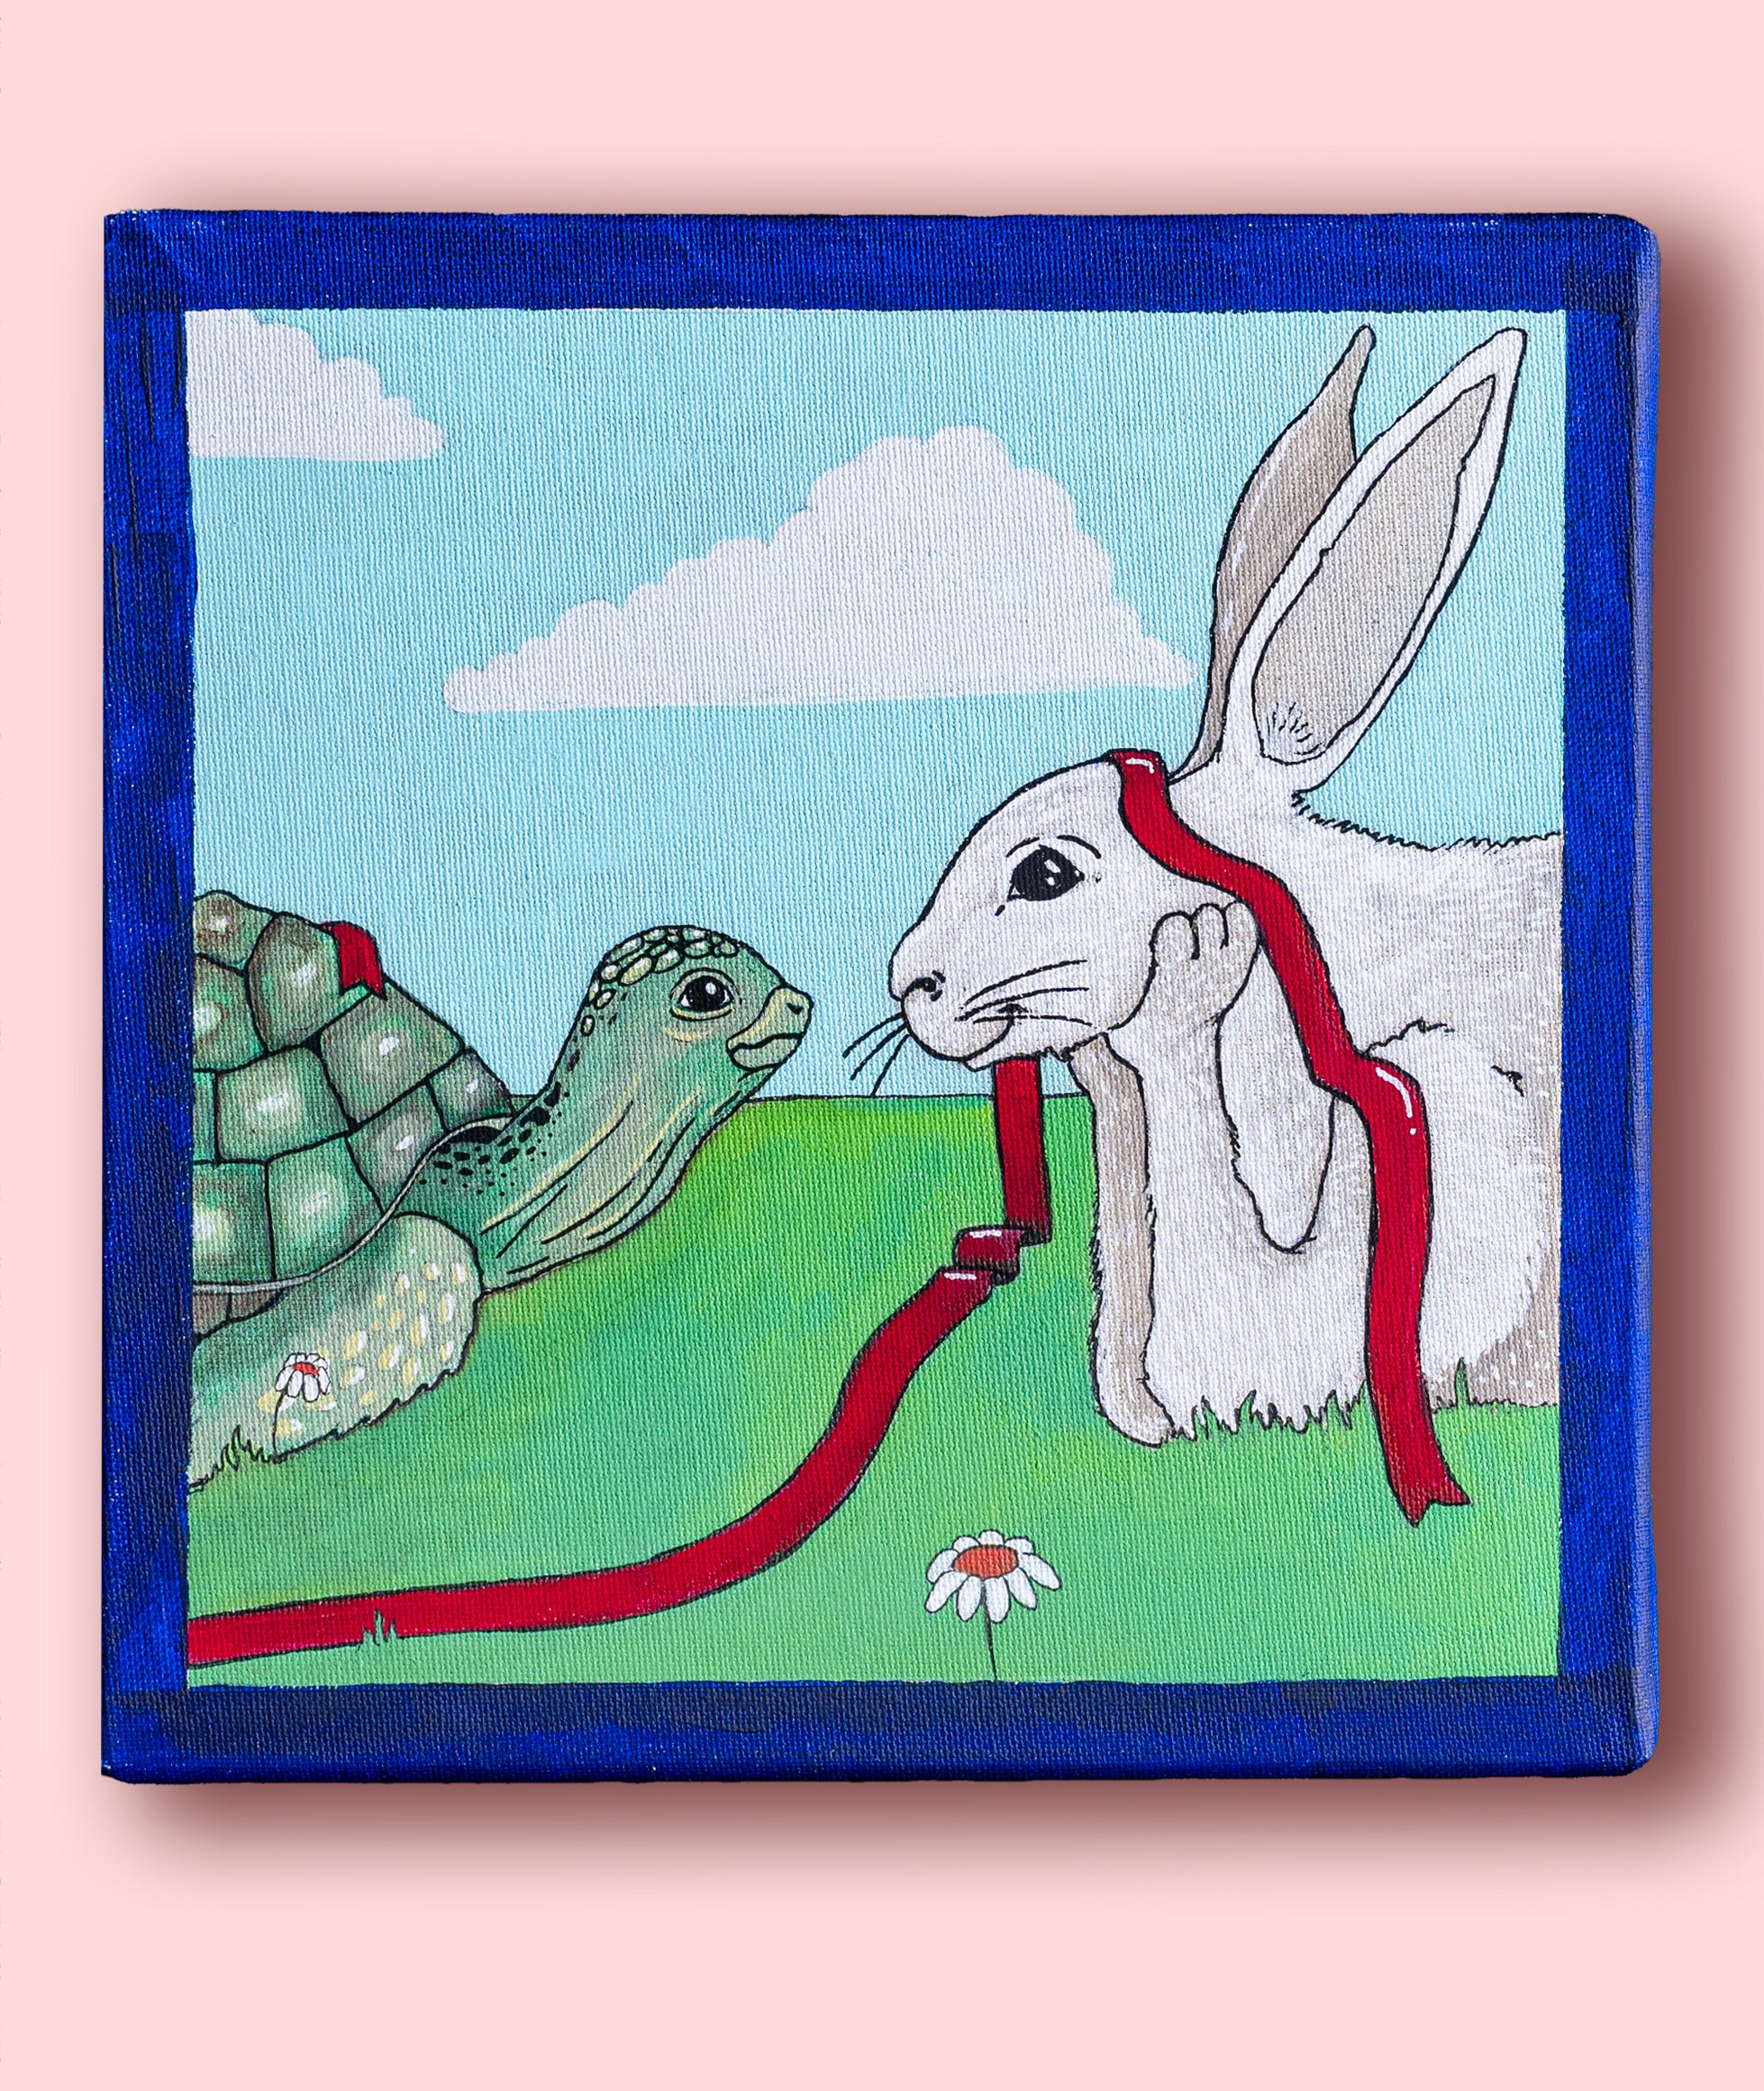 “The Rabbit And The Tortoise”